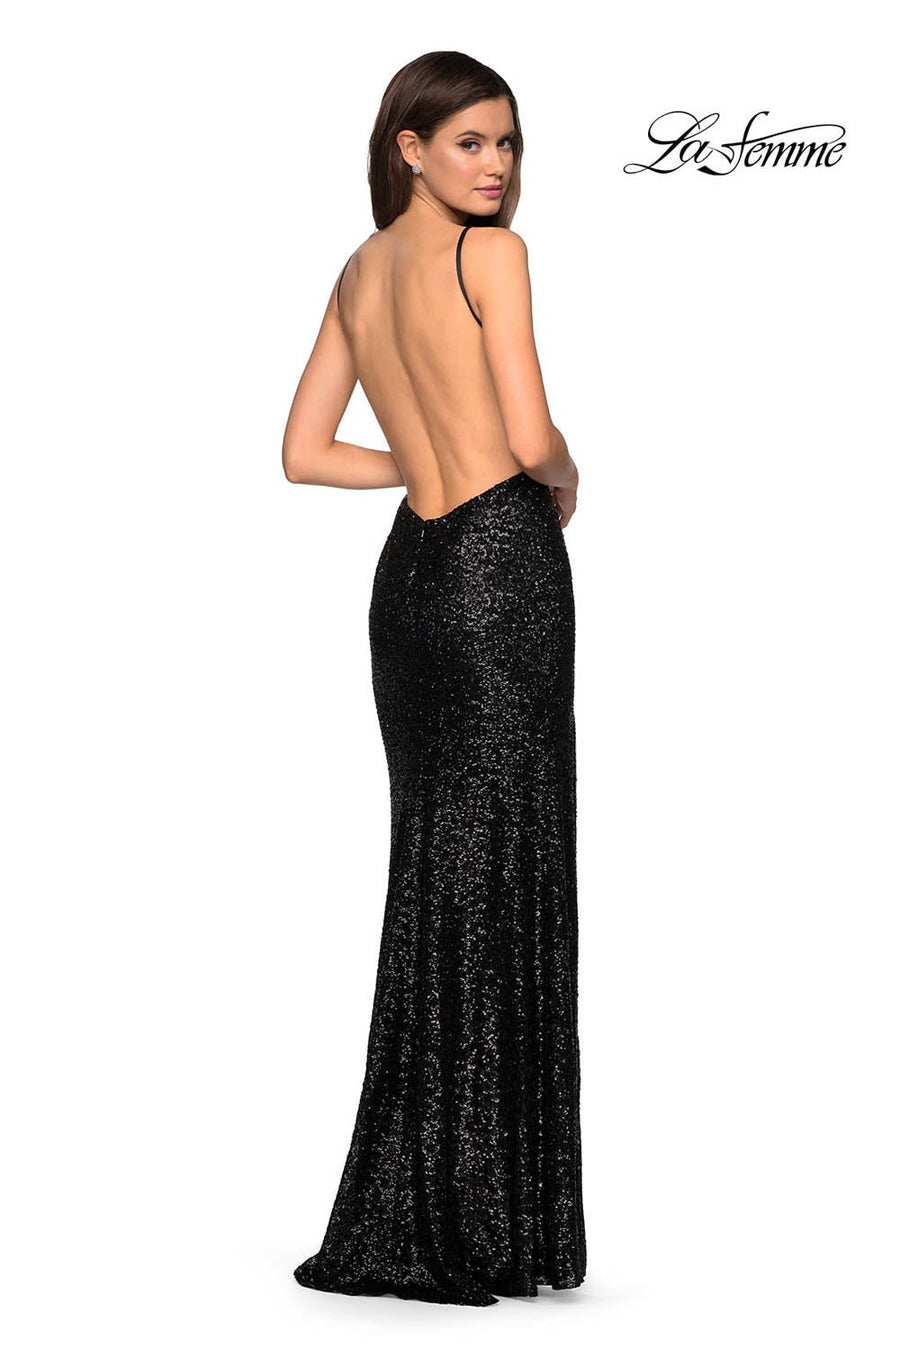 La Femme 27585 prom dress images.  La Femme 27585 is available in these colors: Black, Gunmetal, Navy, Red.